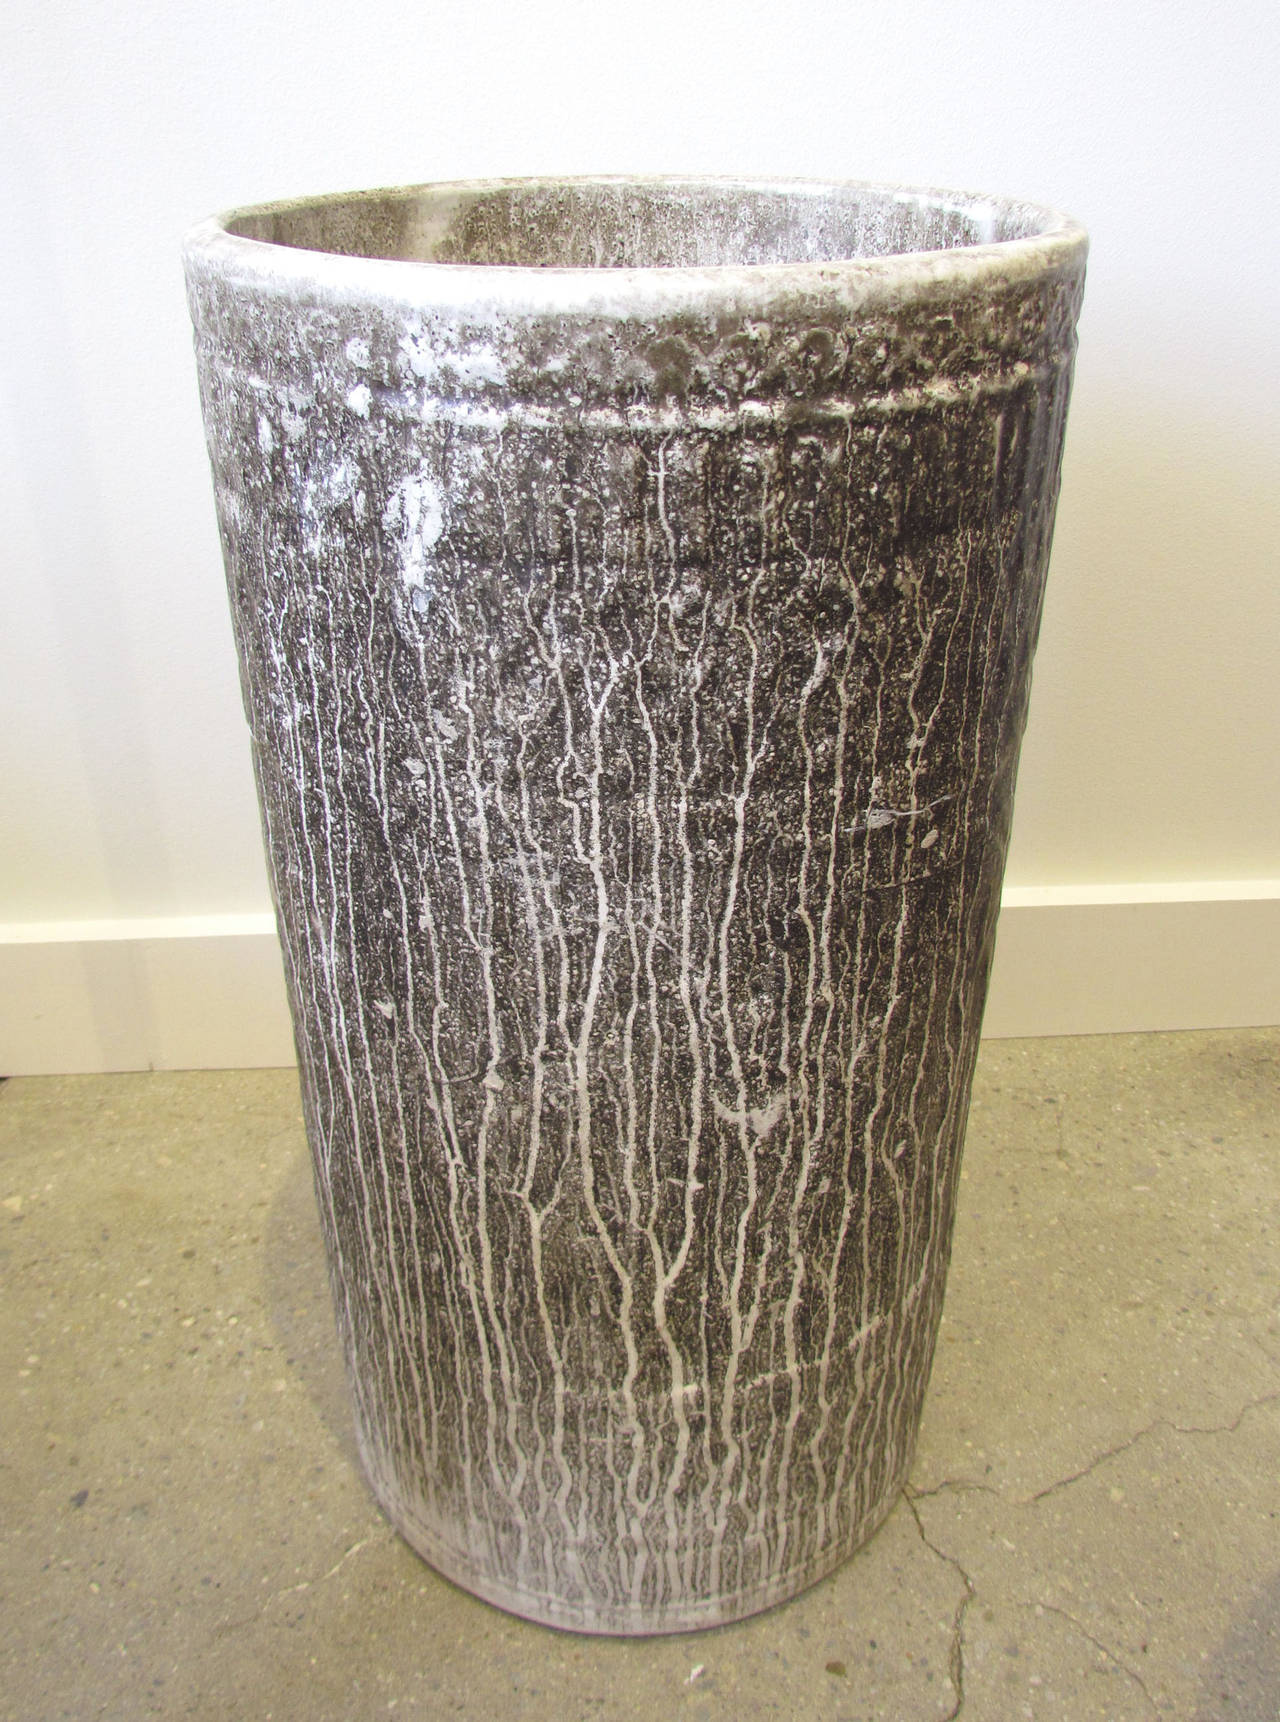 Stunning modernist American Studio pottery cylindrical umbrella stand, circa 1960s. In a masterful technique, the darker drip glaze was applied while the vessel was turned upside down, allowing it to run into forked patterns that resemble trees